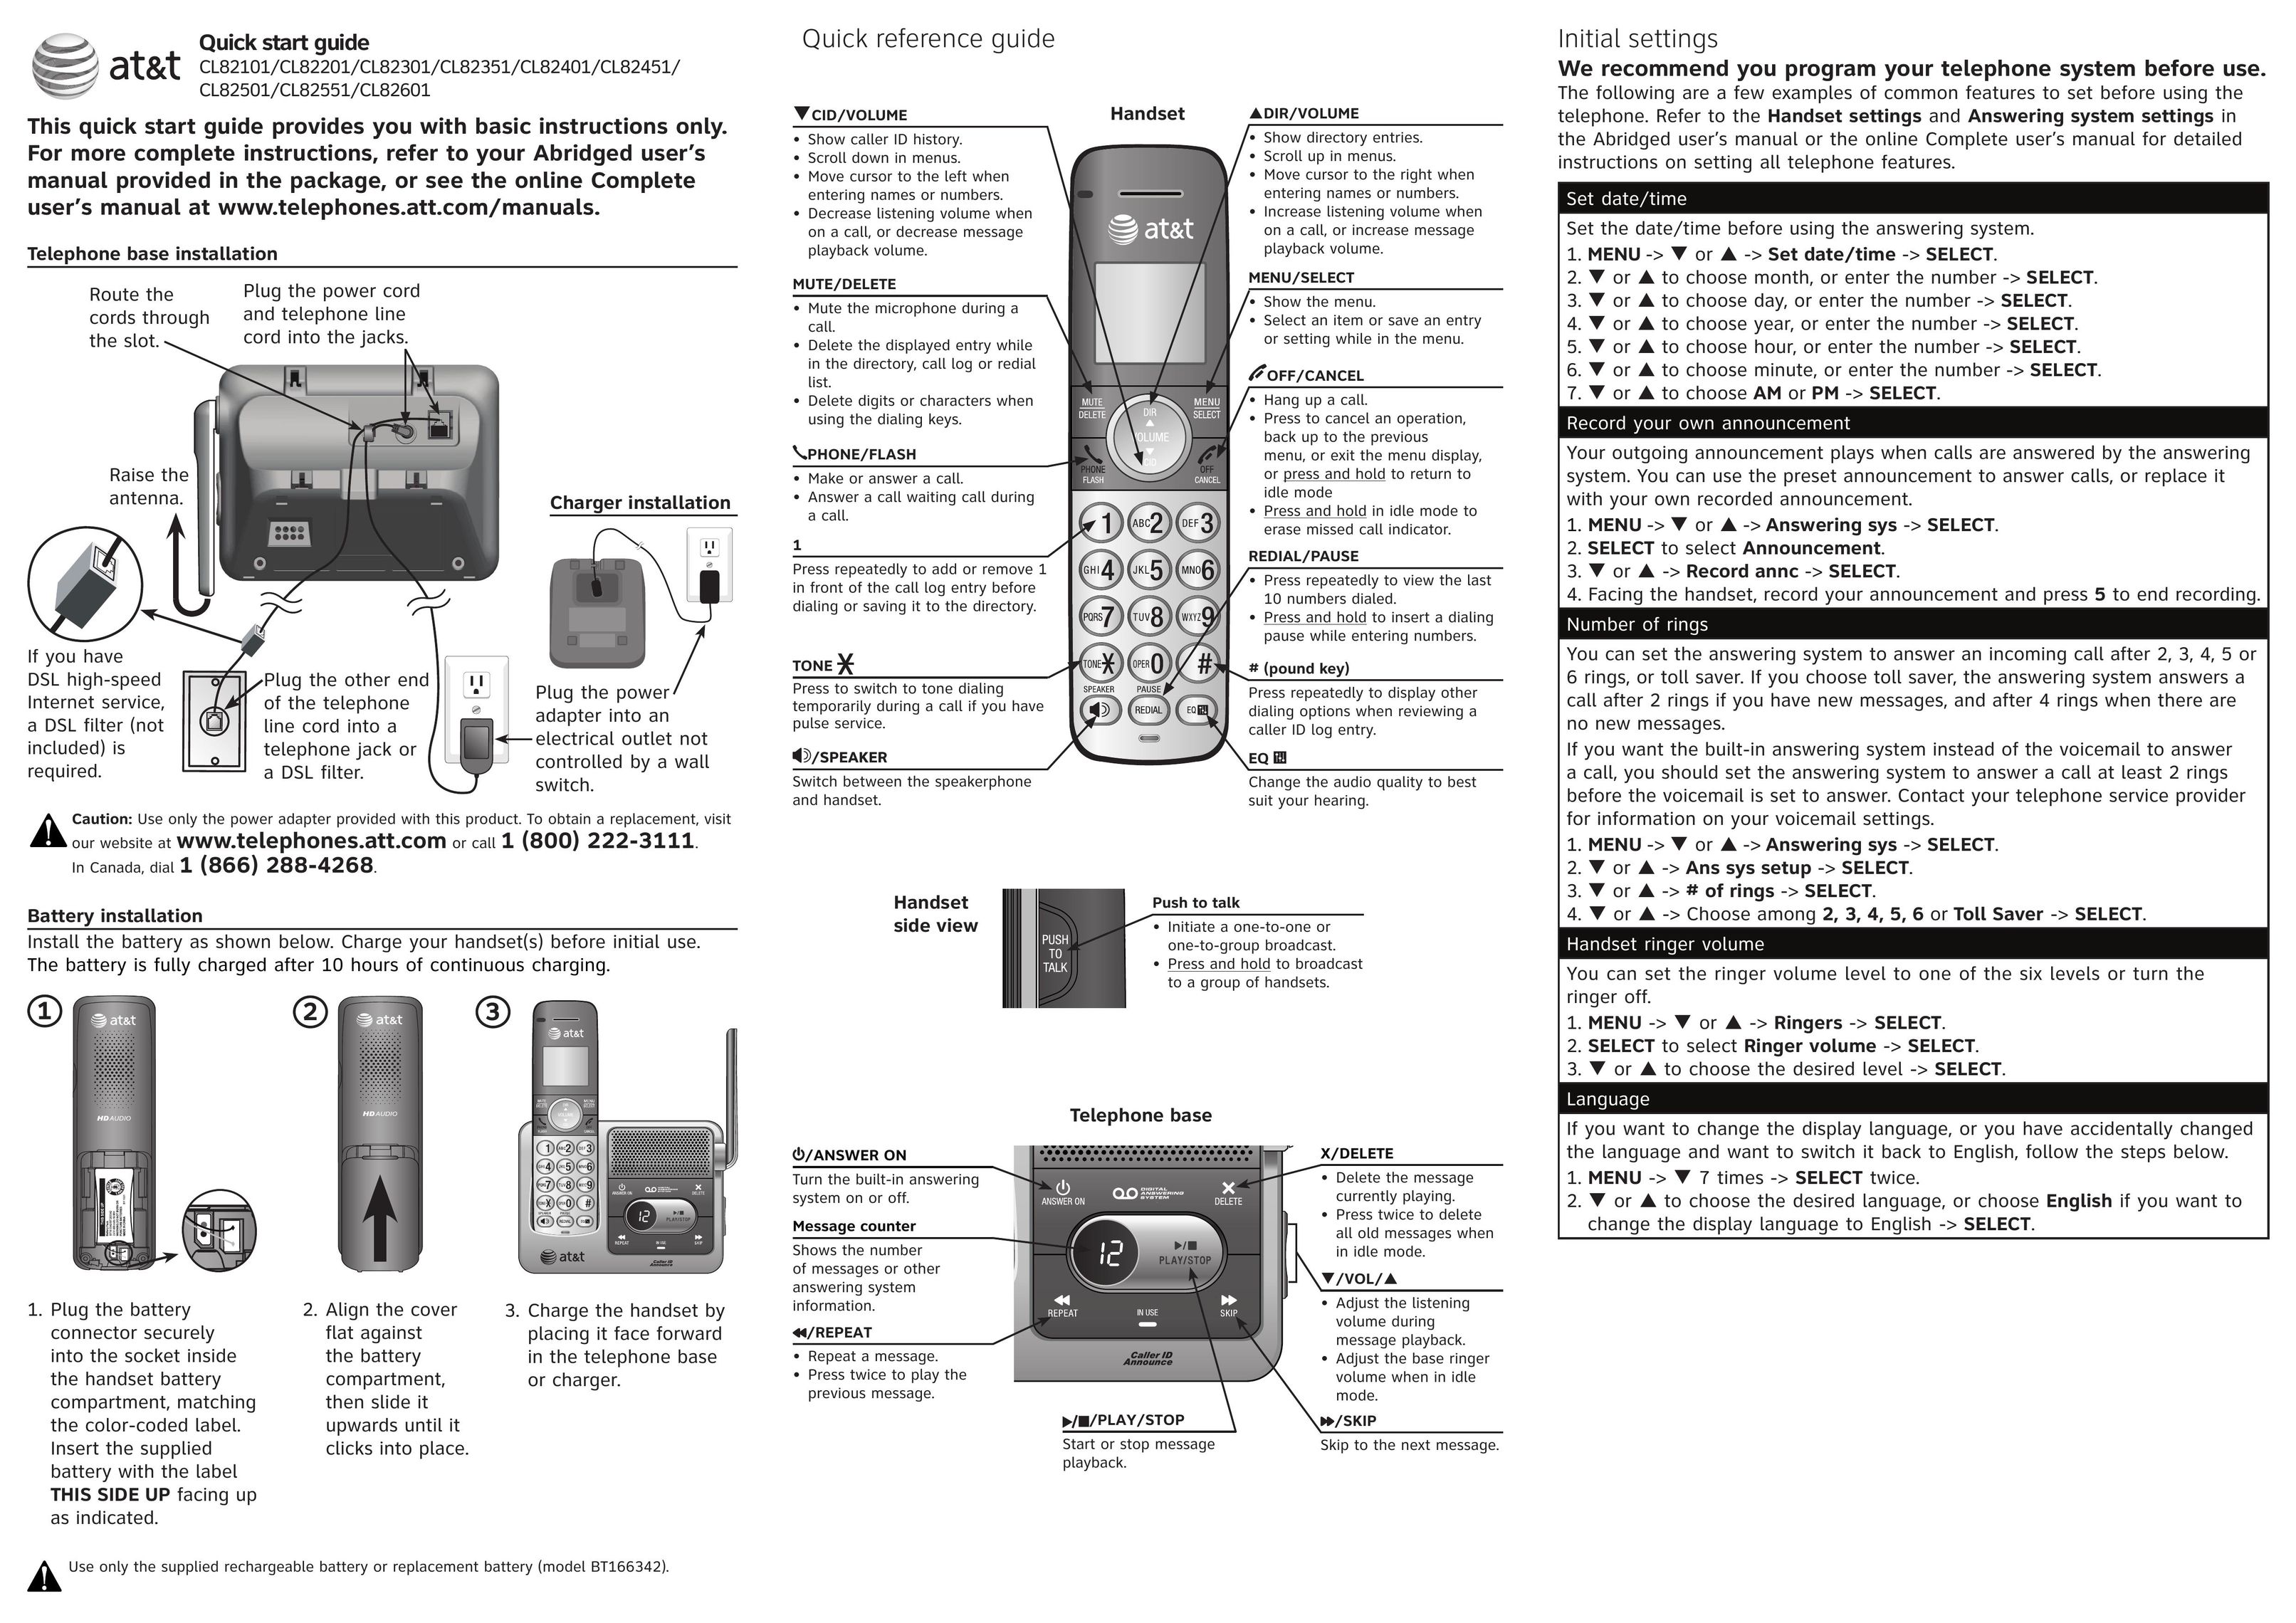 A & T International CL82501 Cordless Telephone User Manual (Page 1)